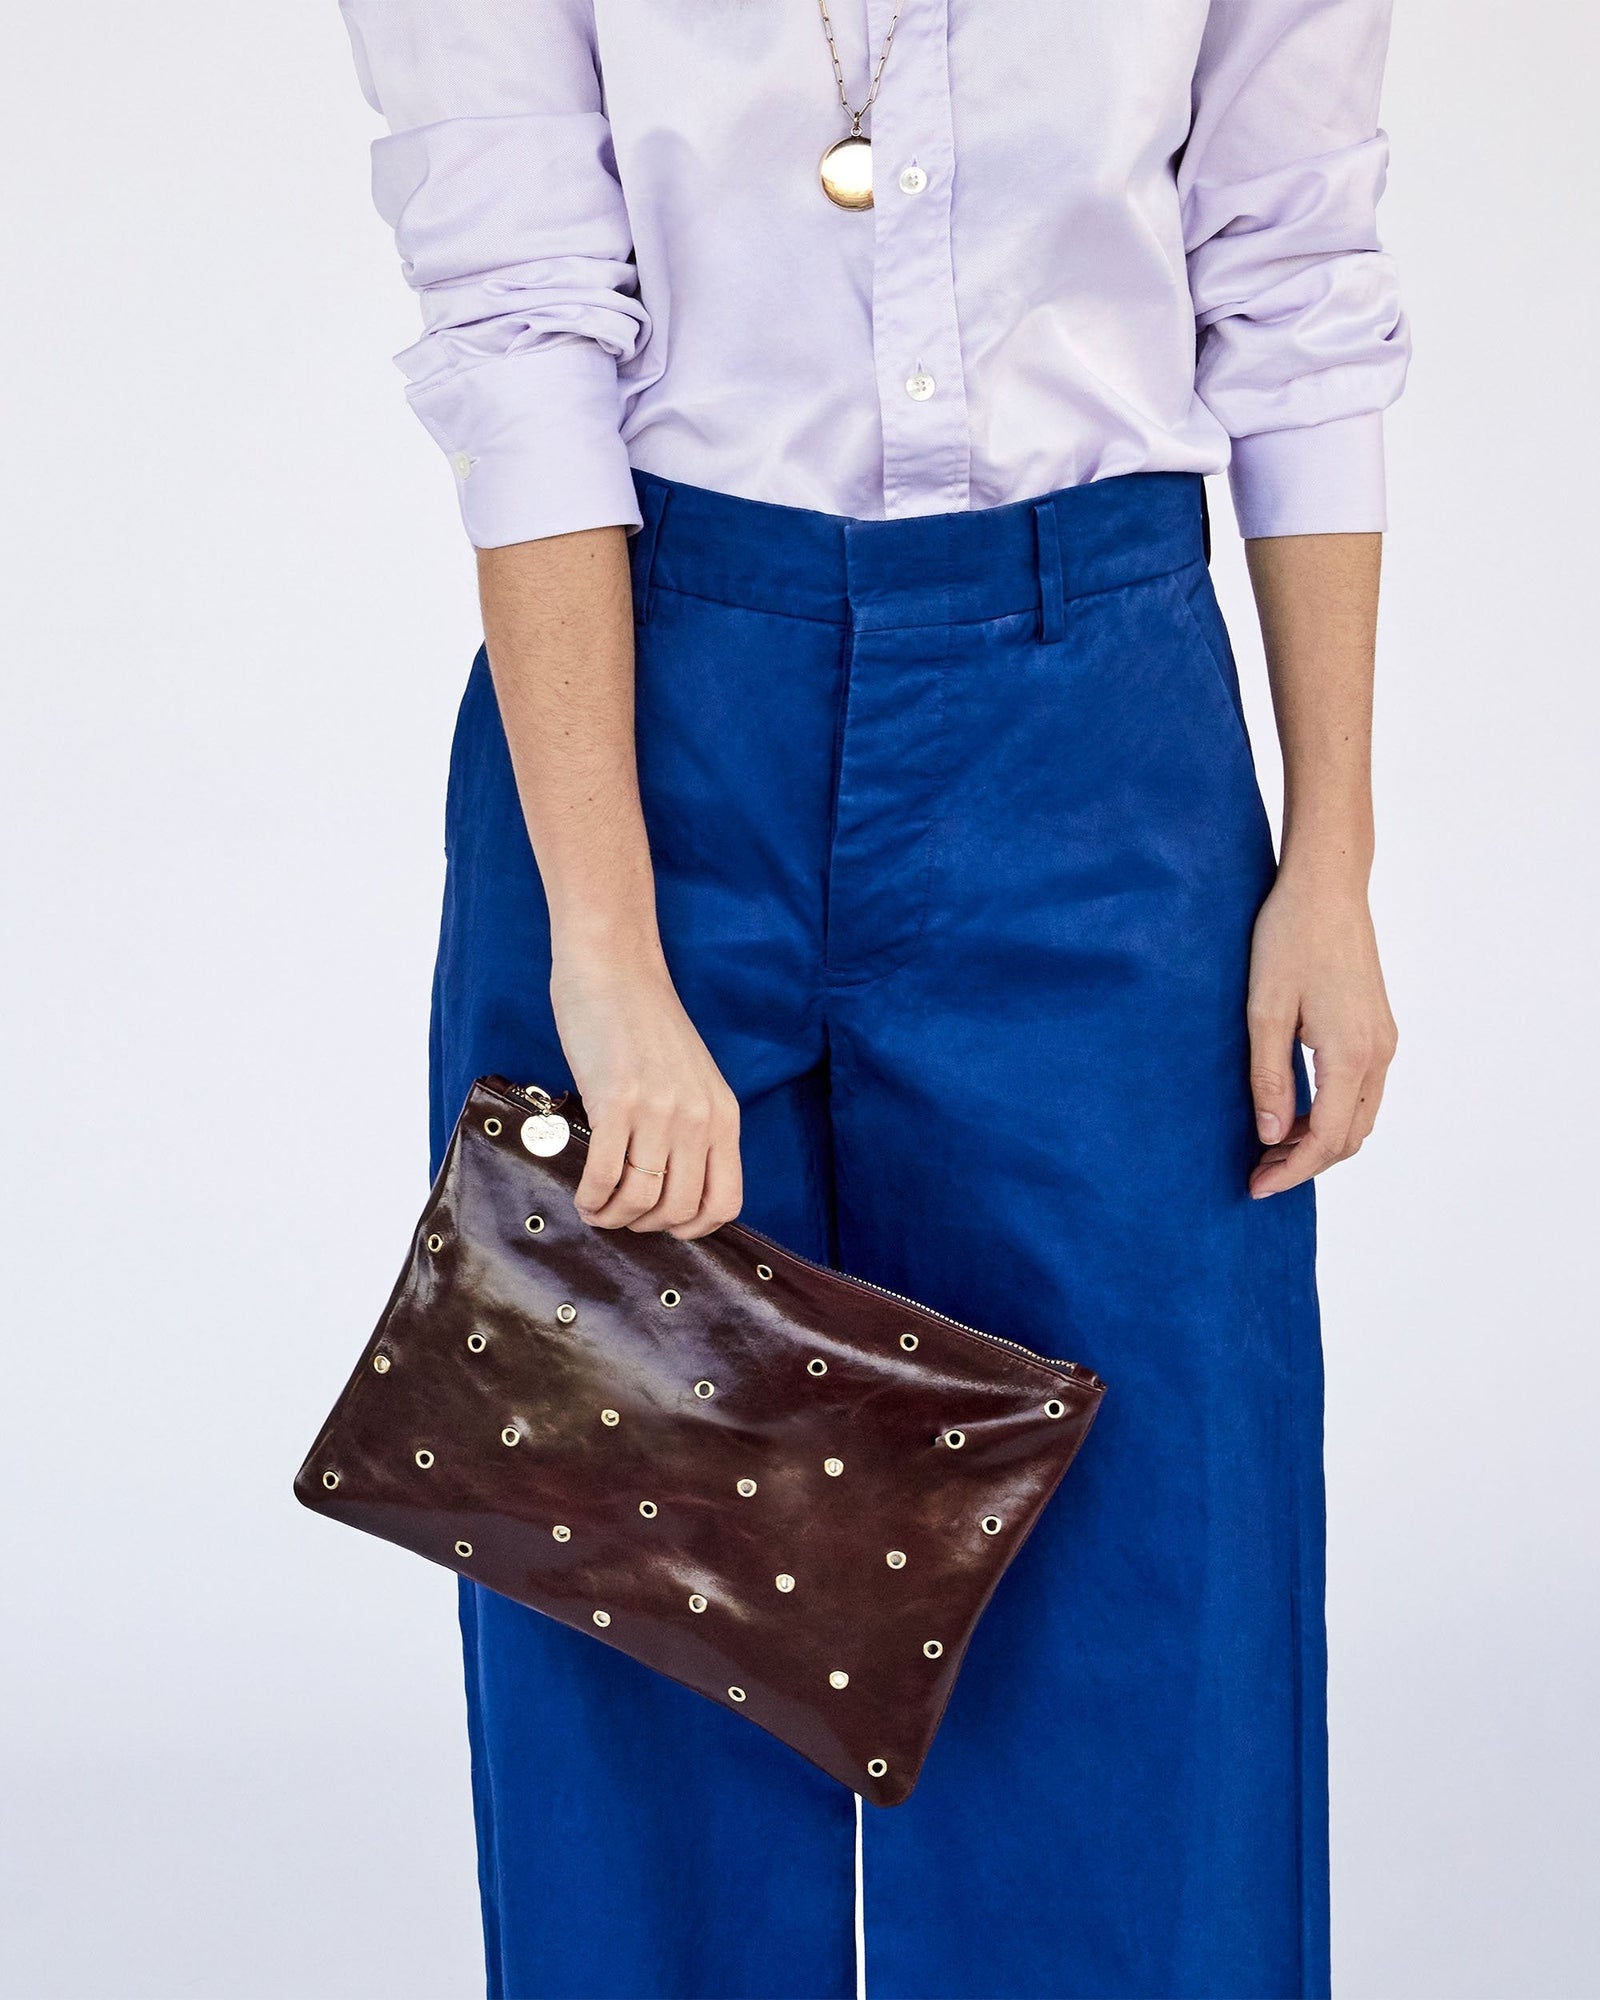 Frannie Holding the Walnut w/ Grommets Flat Clutch with Tabs with One Hand